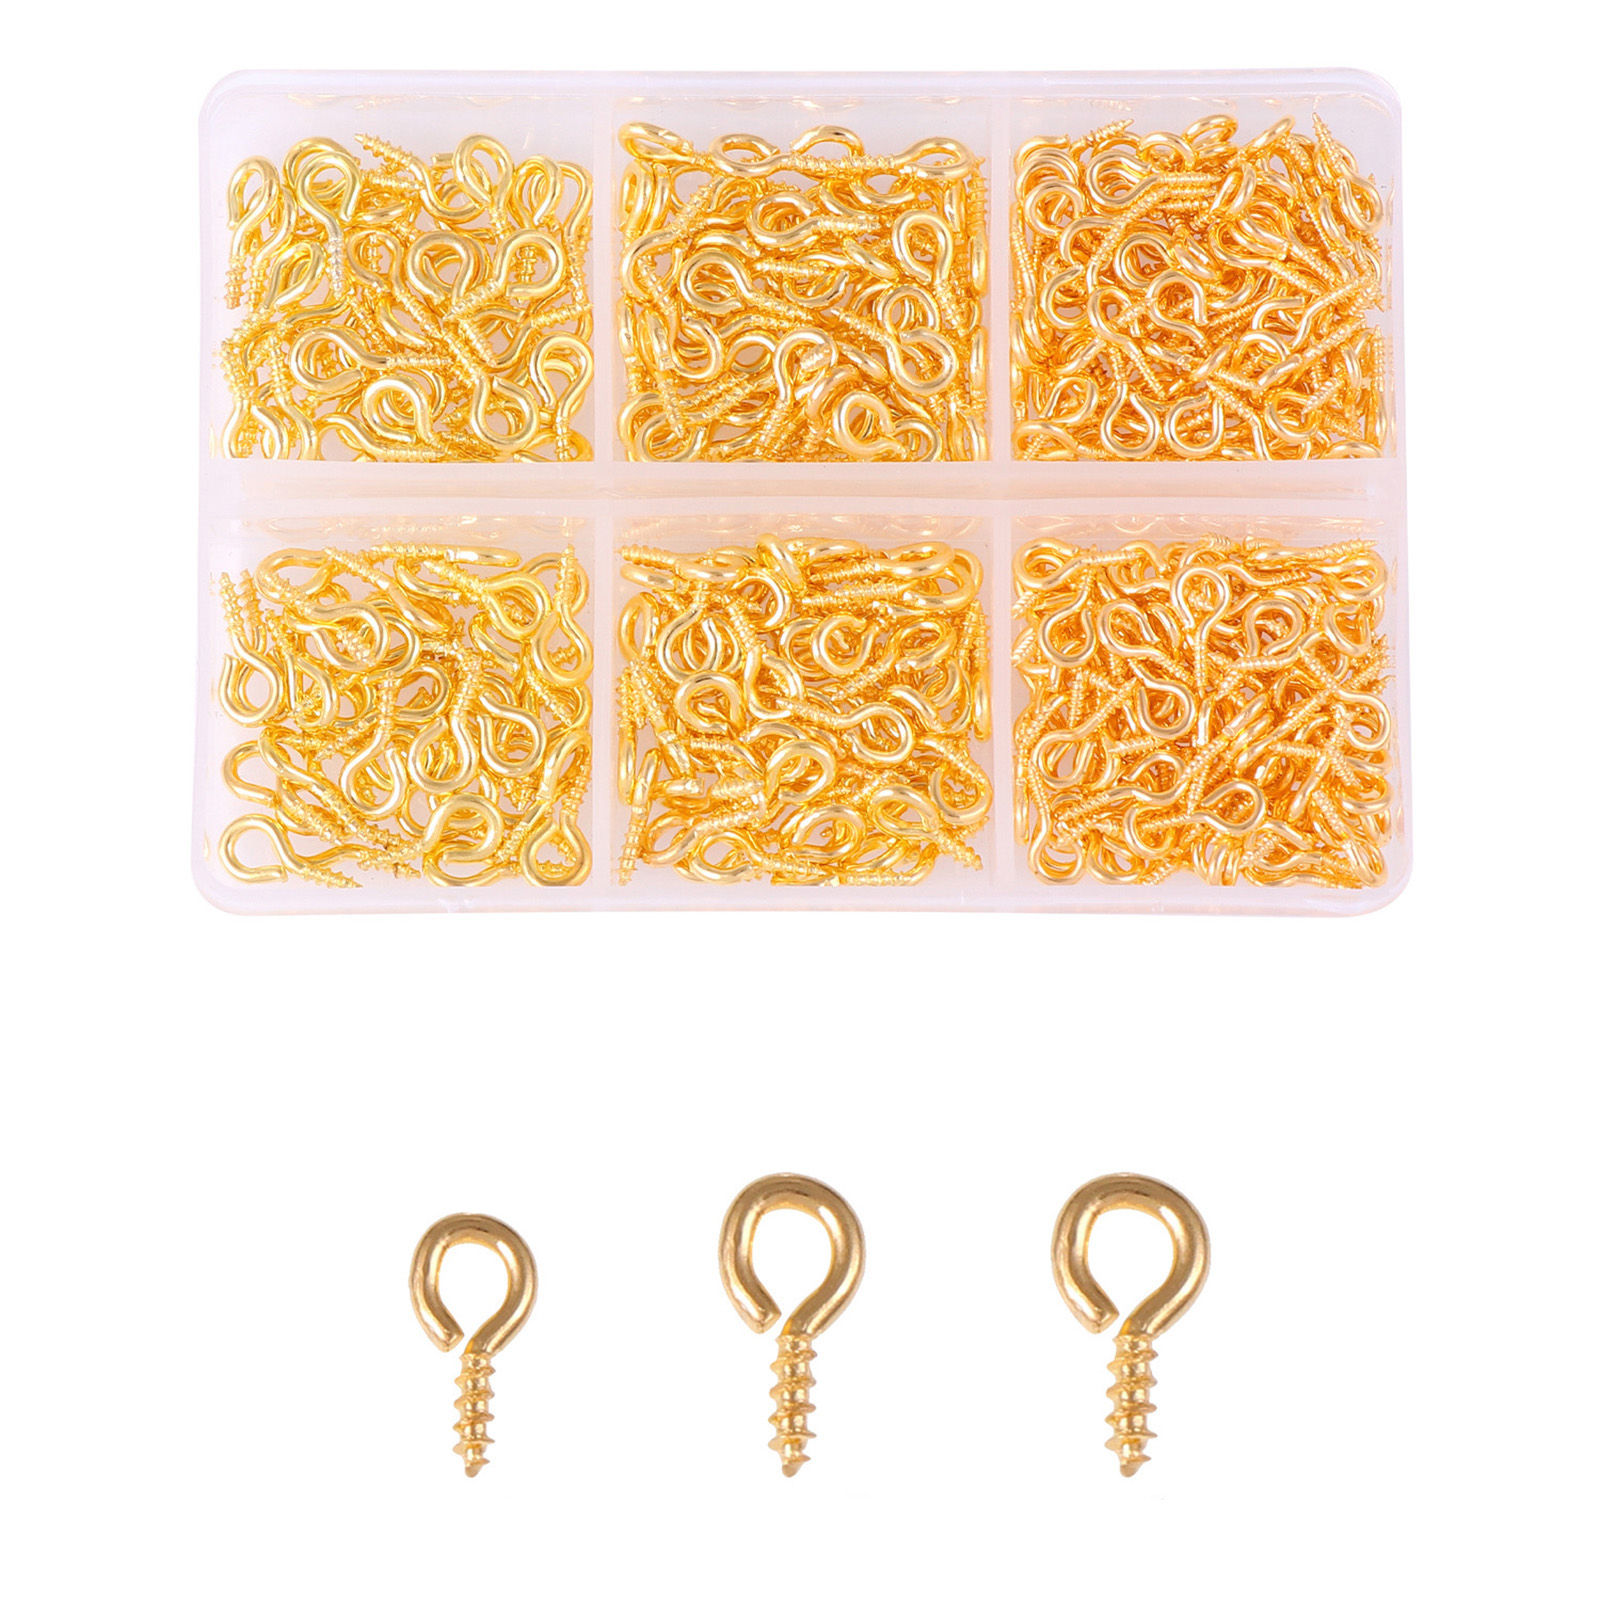 Picture of Iron Based Alloy Screw Eyes Bails Top Drilled Findings Gold Plated 8cm x 5.5cm, 1 Set ( 400 PCs/Box)